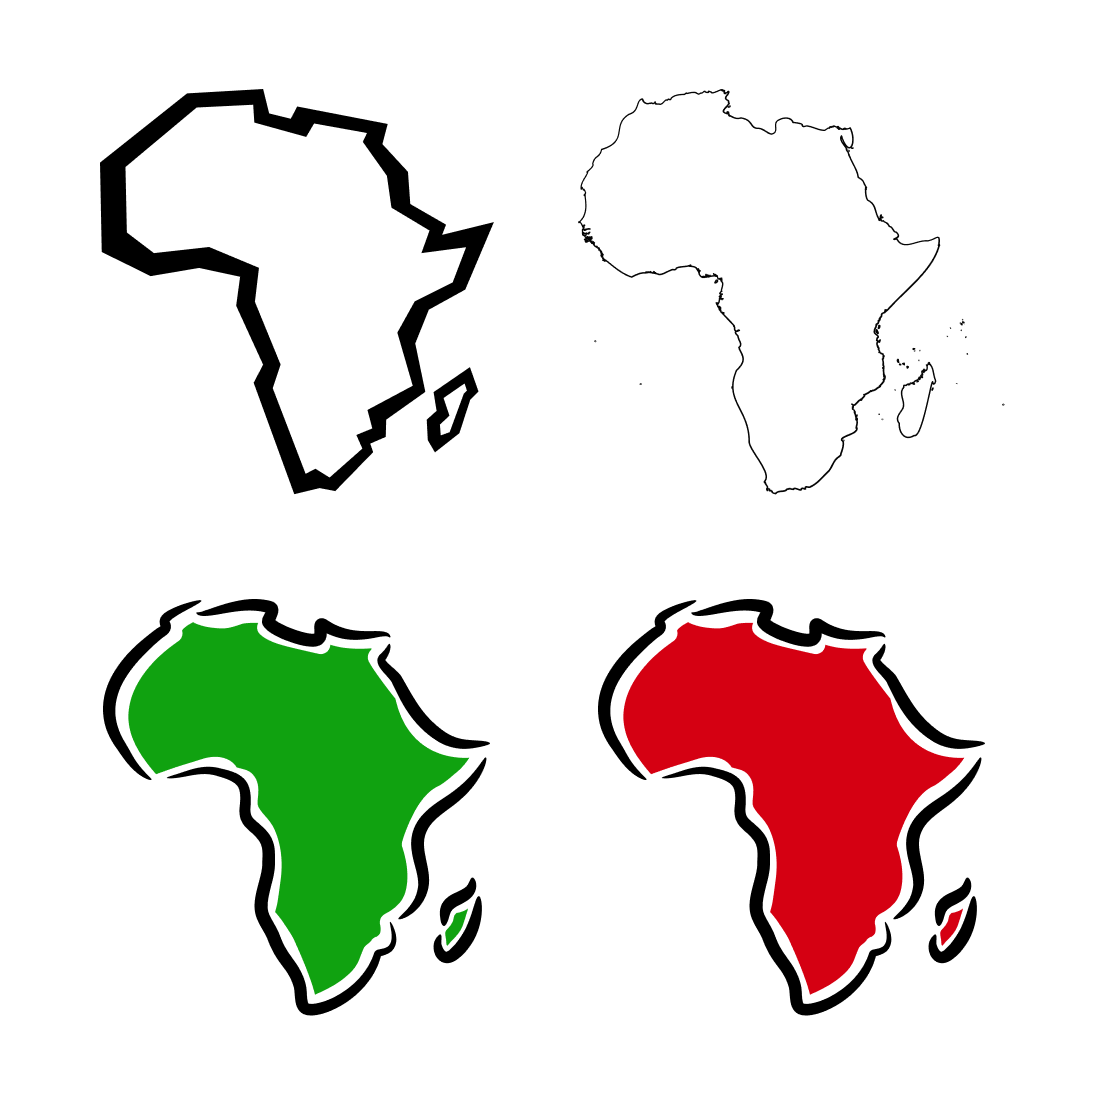 African Continent Temporary Tattoo Sticker - OhMyTat